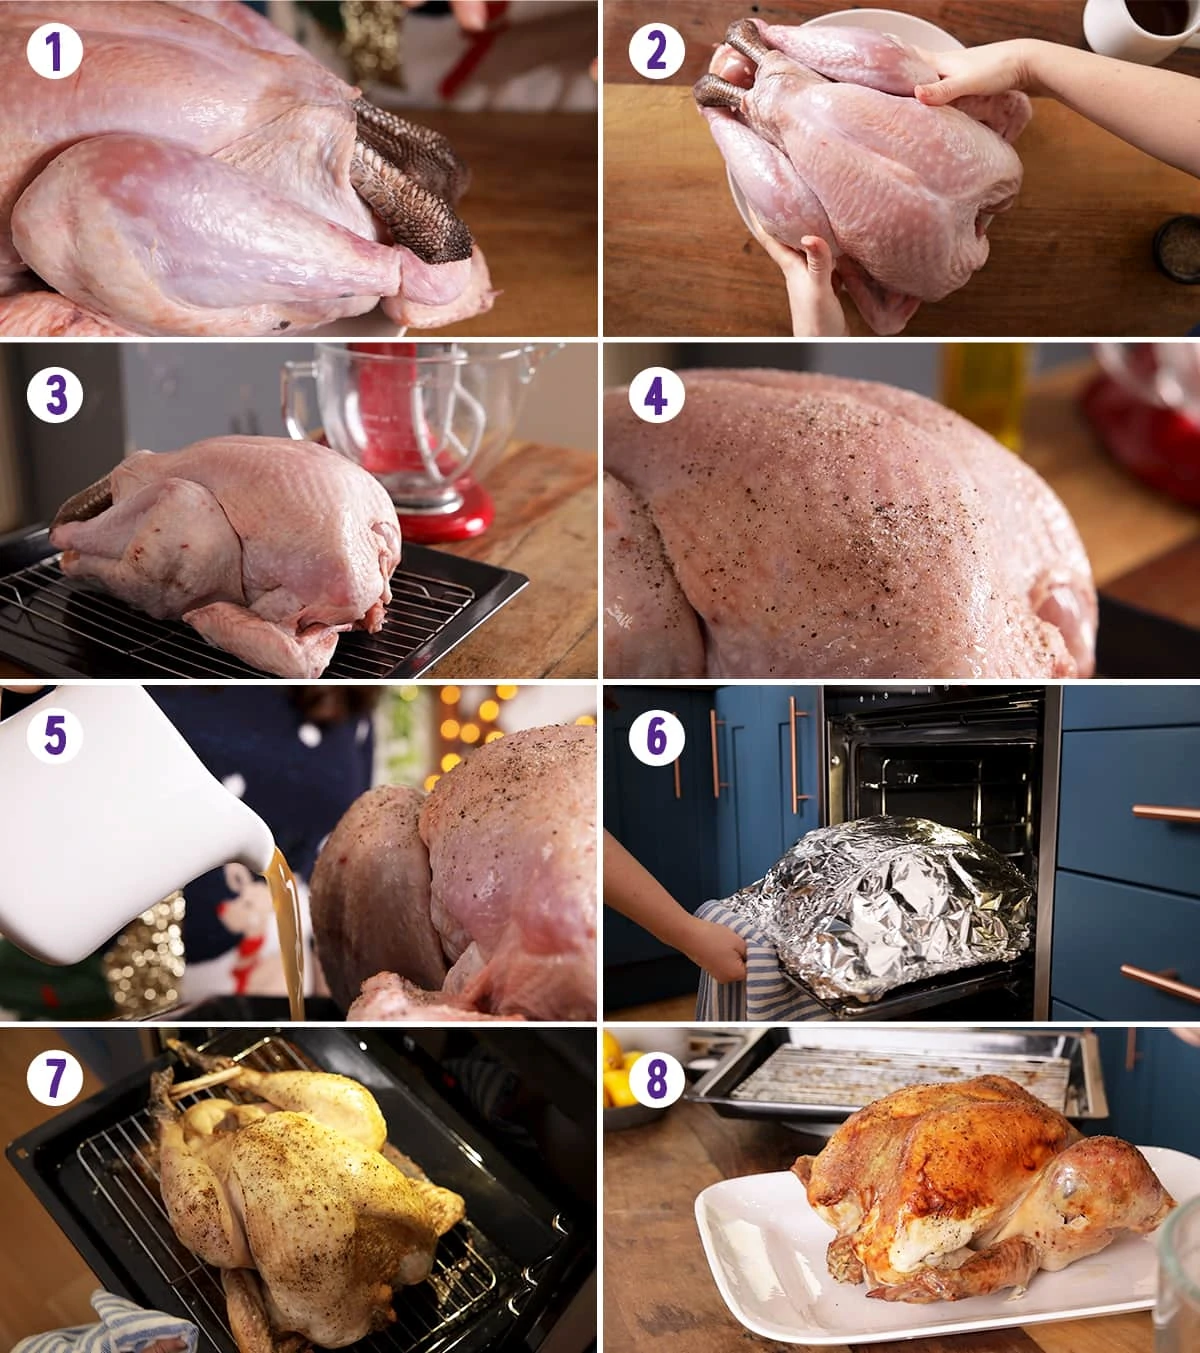 8 image collage showing how to roast a turkey